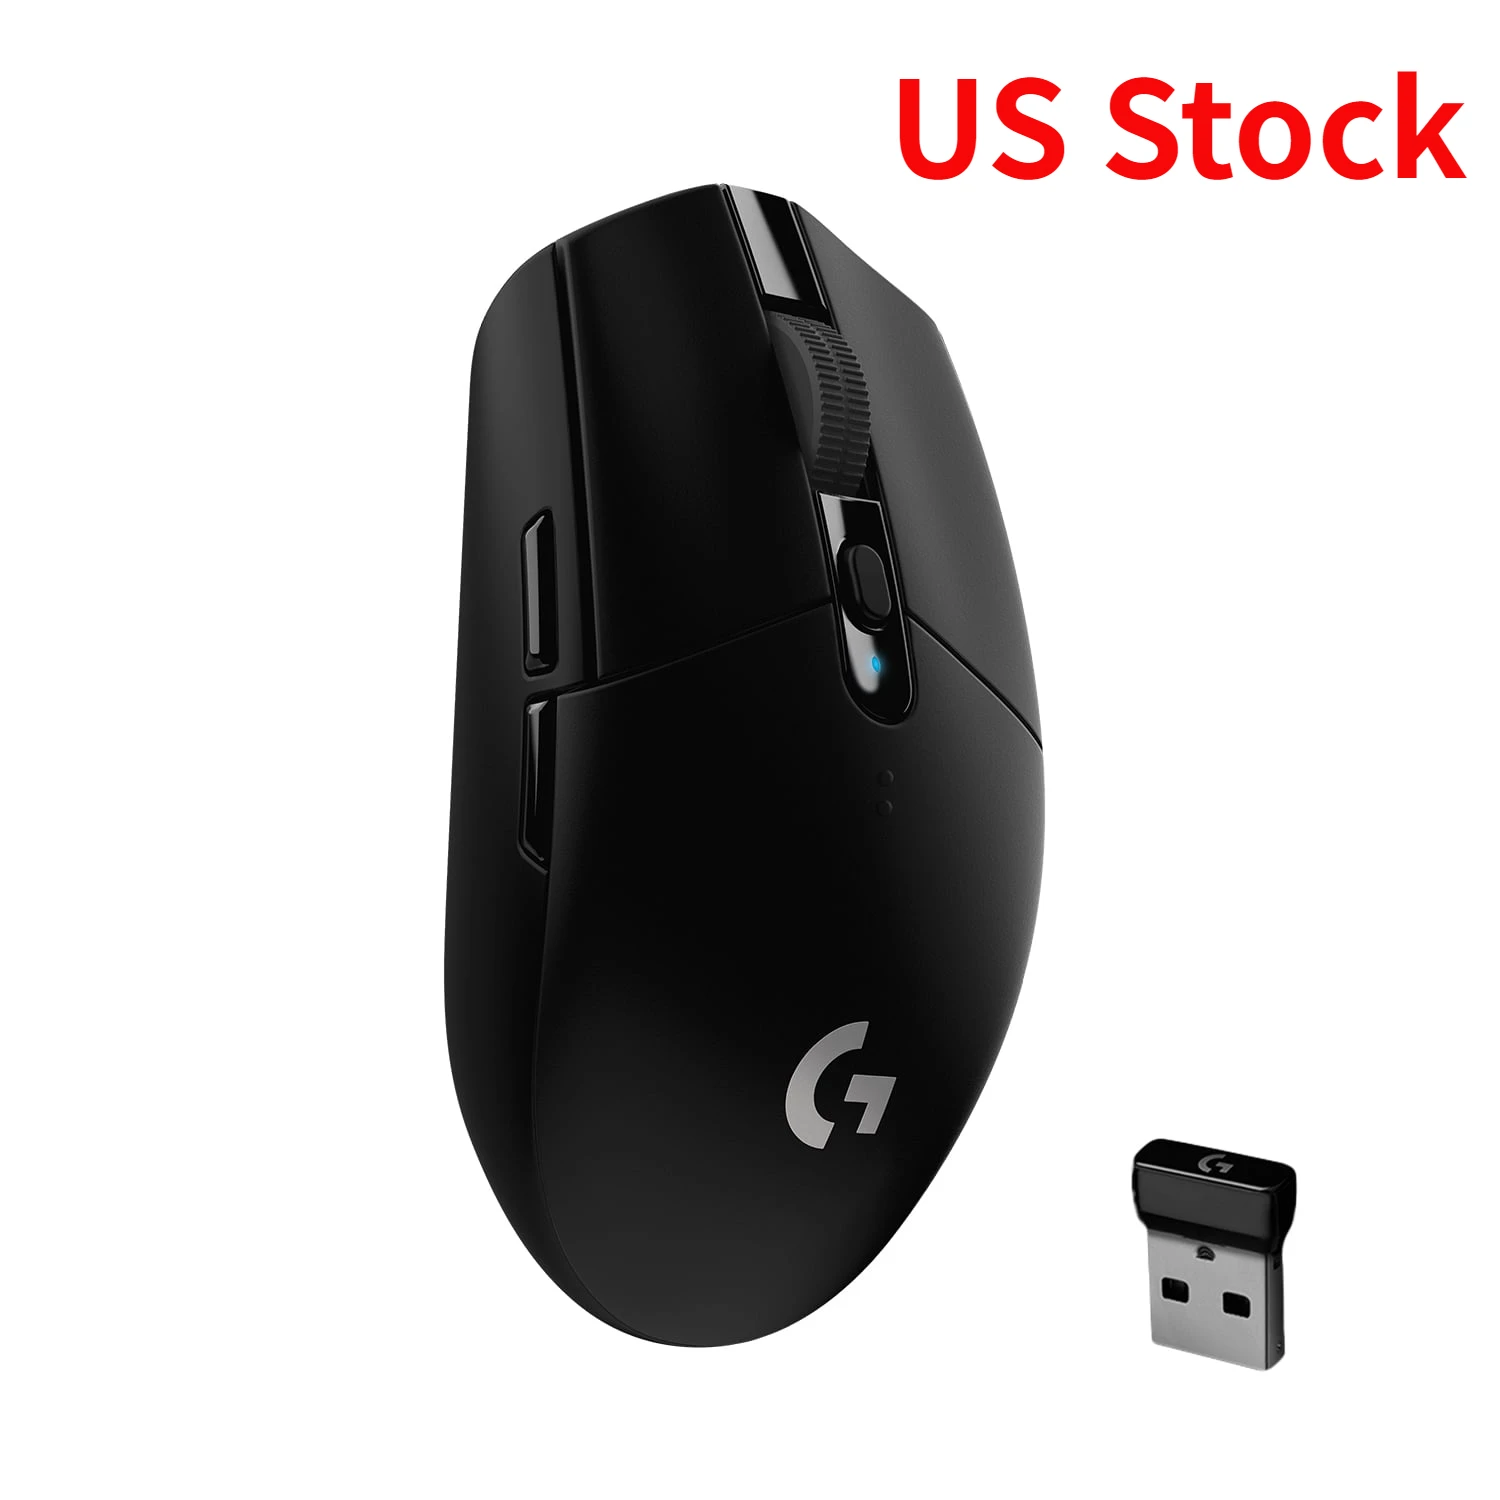 

US Stock Logitech G305 LIGHTSPEED Wireless Gaming Mouse HERO Sensor 12,000 DPI 6 Programmable Buttons Compatible with PC Mac